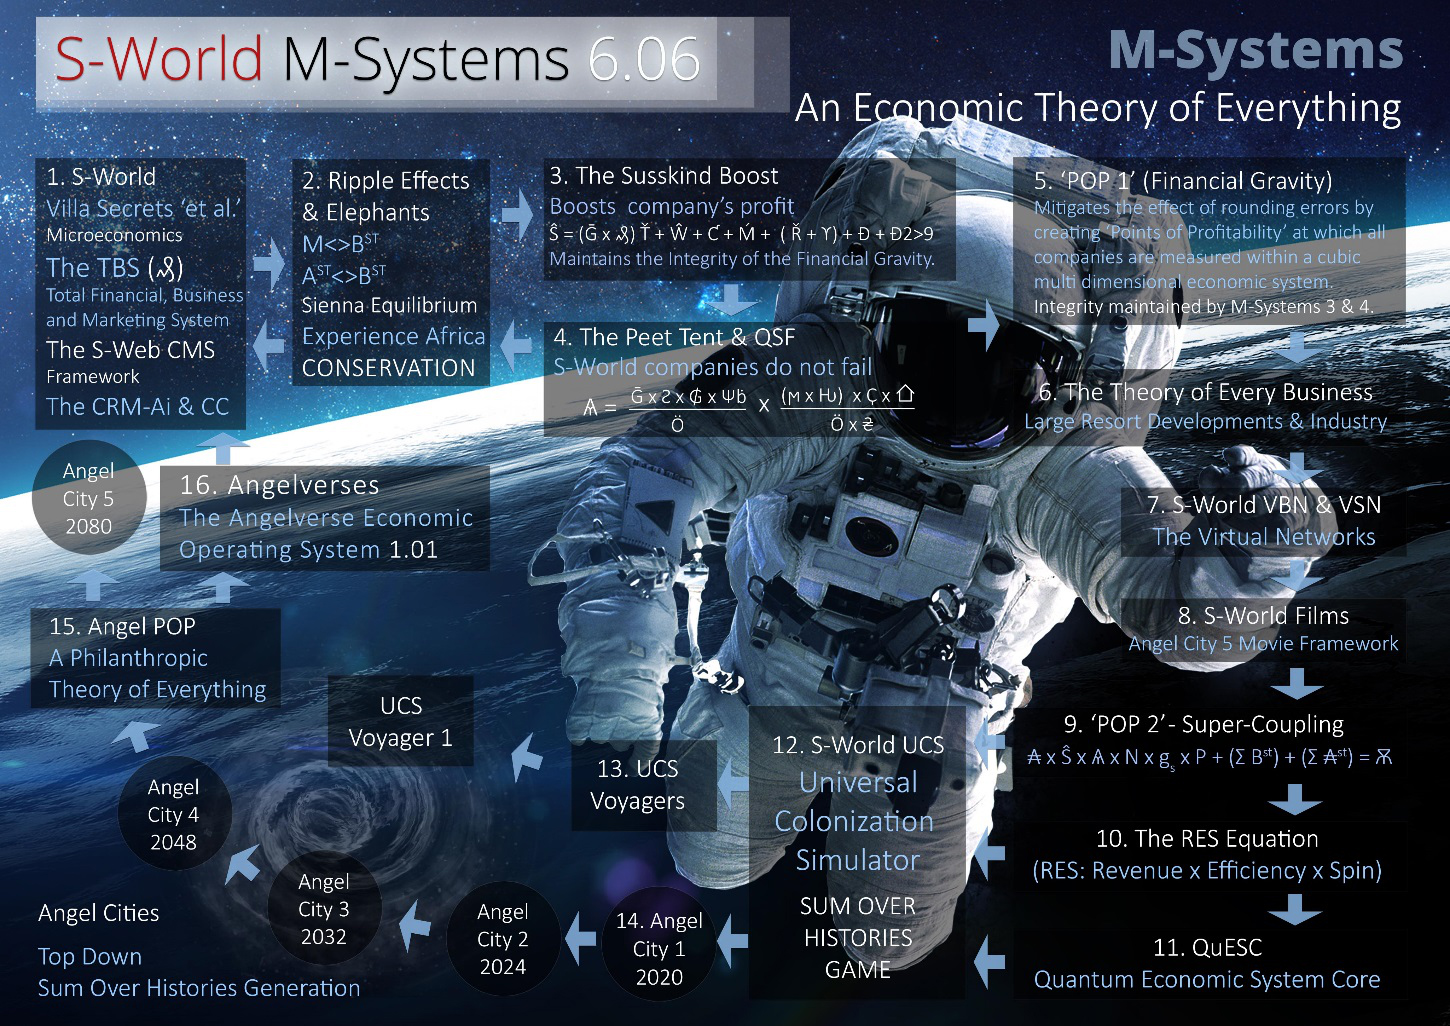 S-World M-Systems